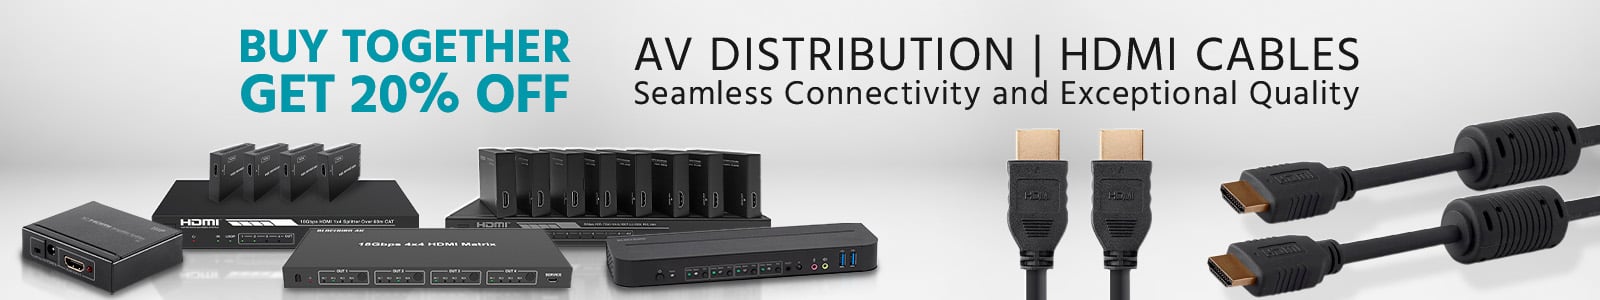 Buy Together!
AV Distribution | HDMI Cables
Seamless Connectivity and Exceptional Quality
Get 20% OFF
Shop Now